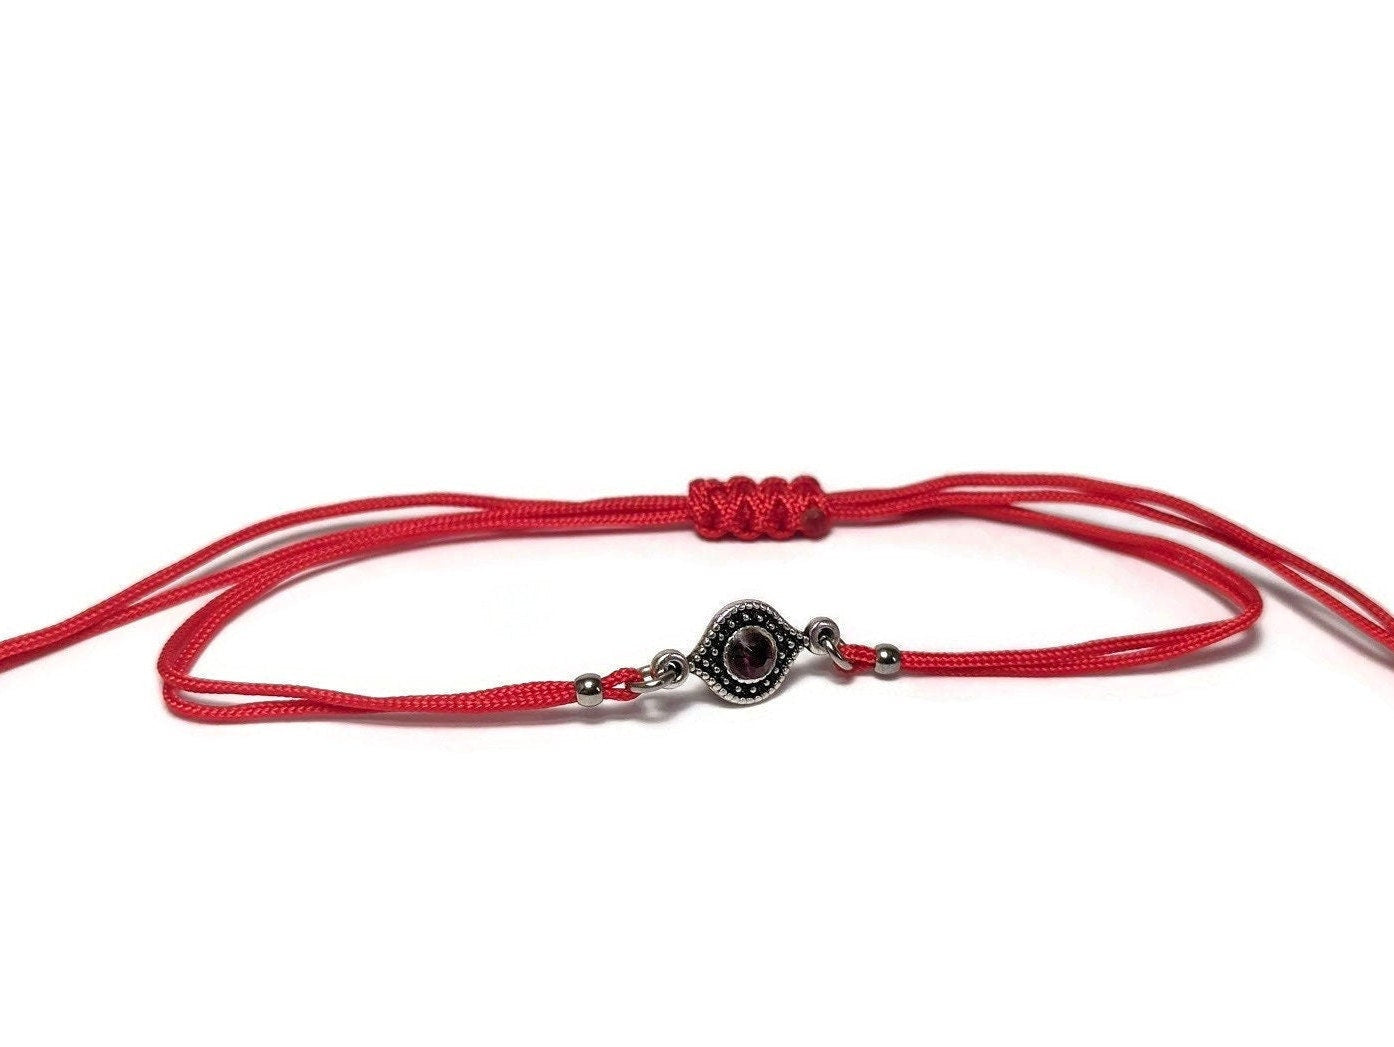 Evil eye string bracelet with a red crytal stone, good luck bracelet for her or for him, Greek jewelry